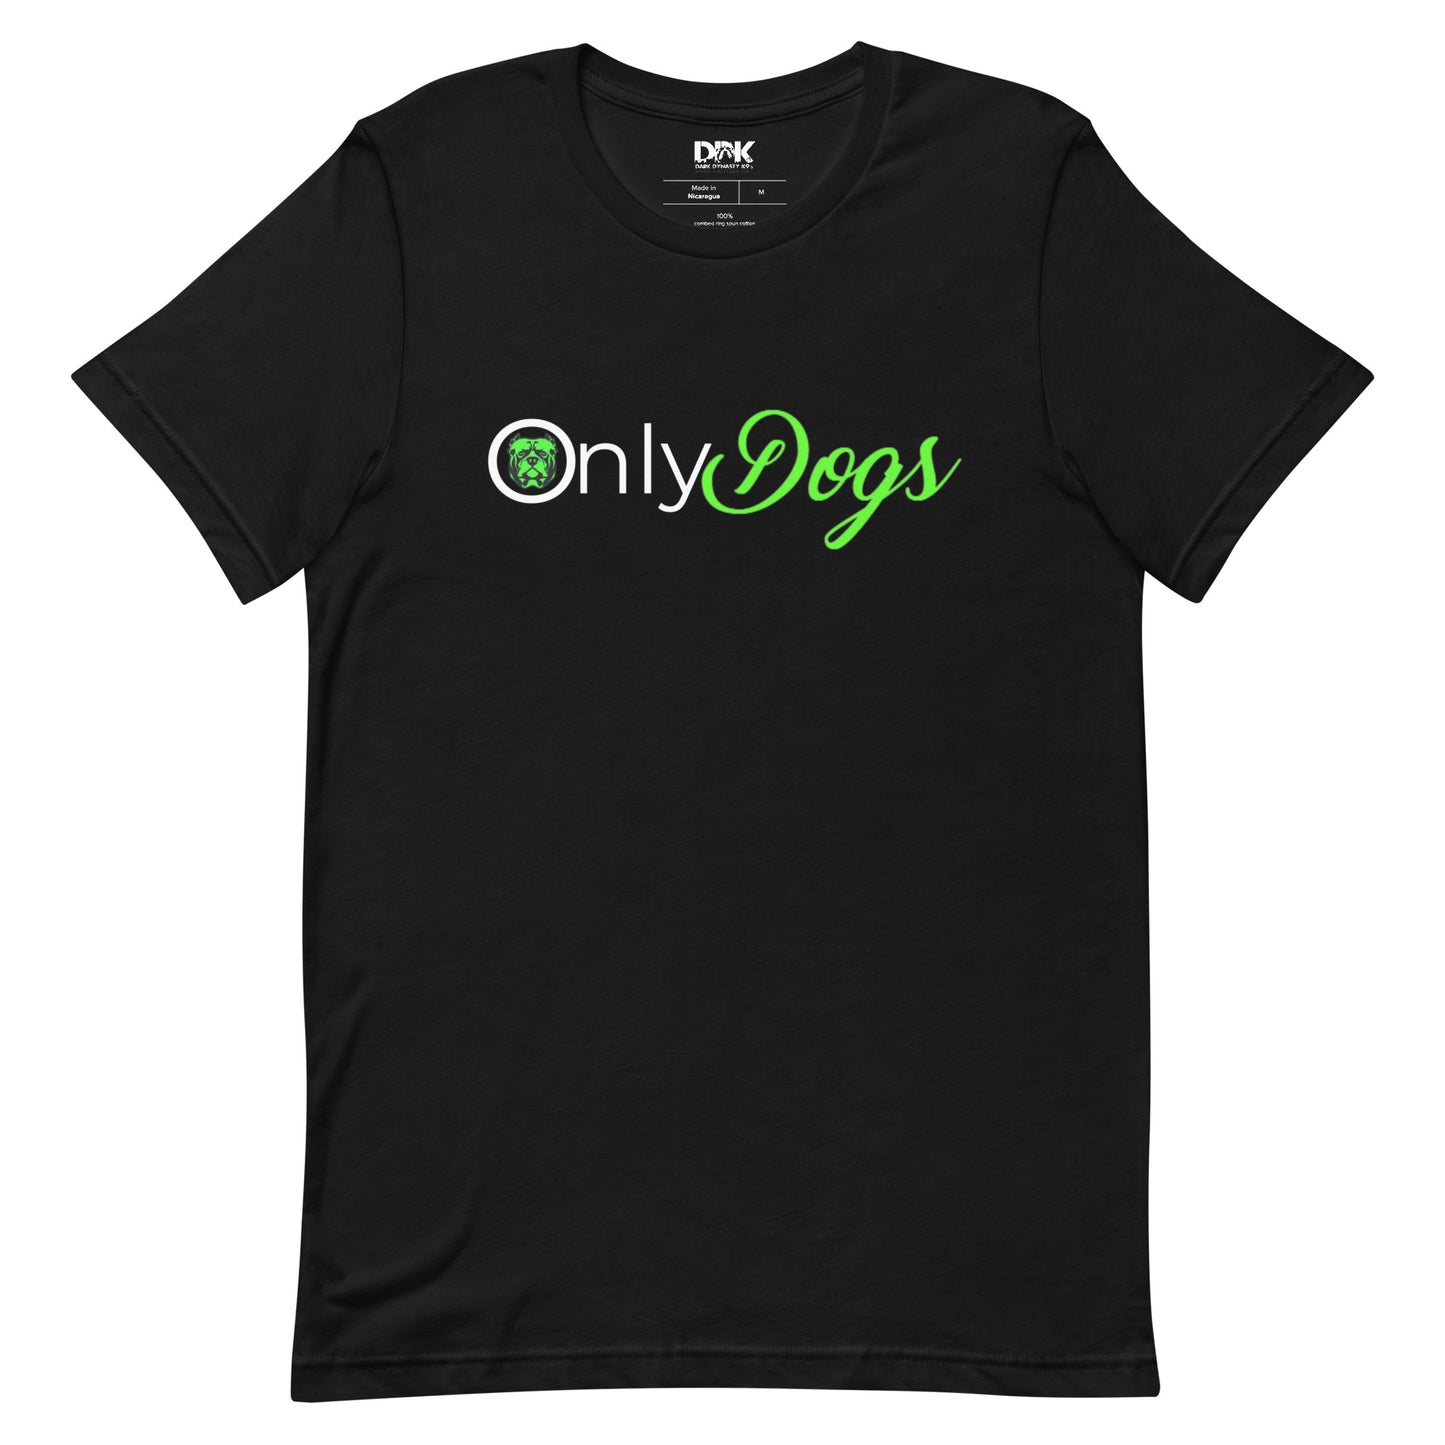 Only Dogs Men's T-Shirt